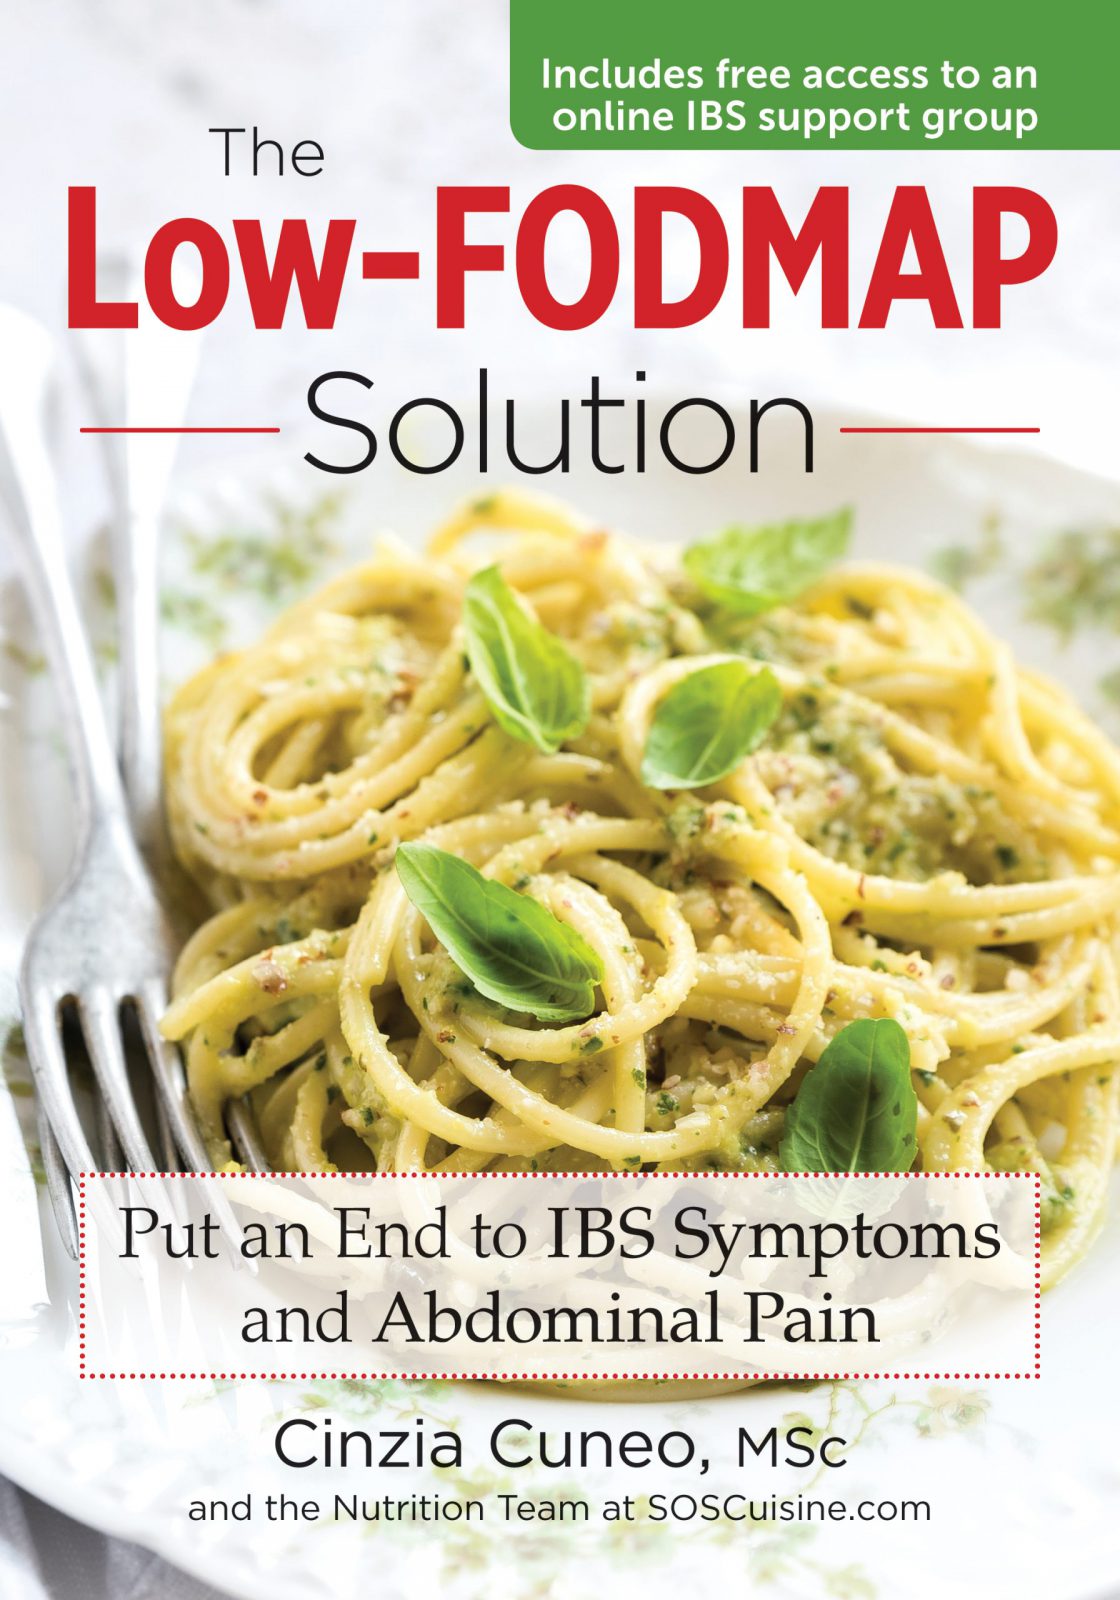 The Low-FODMAP Solution